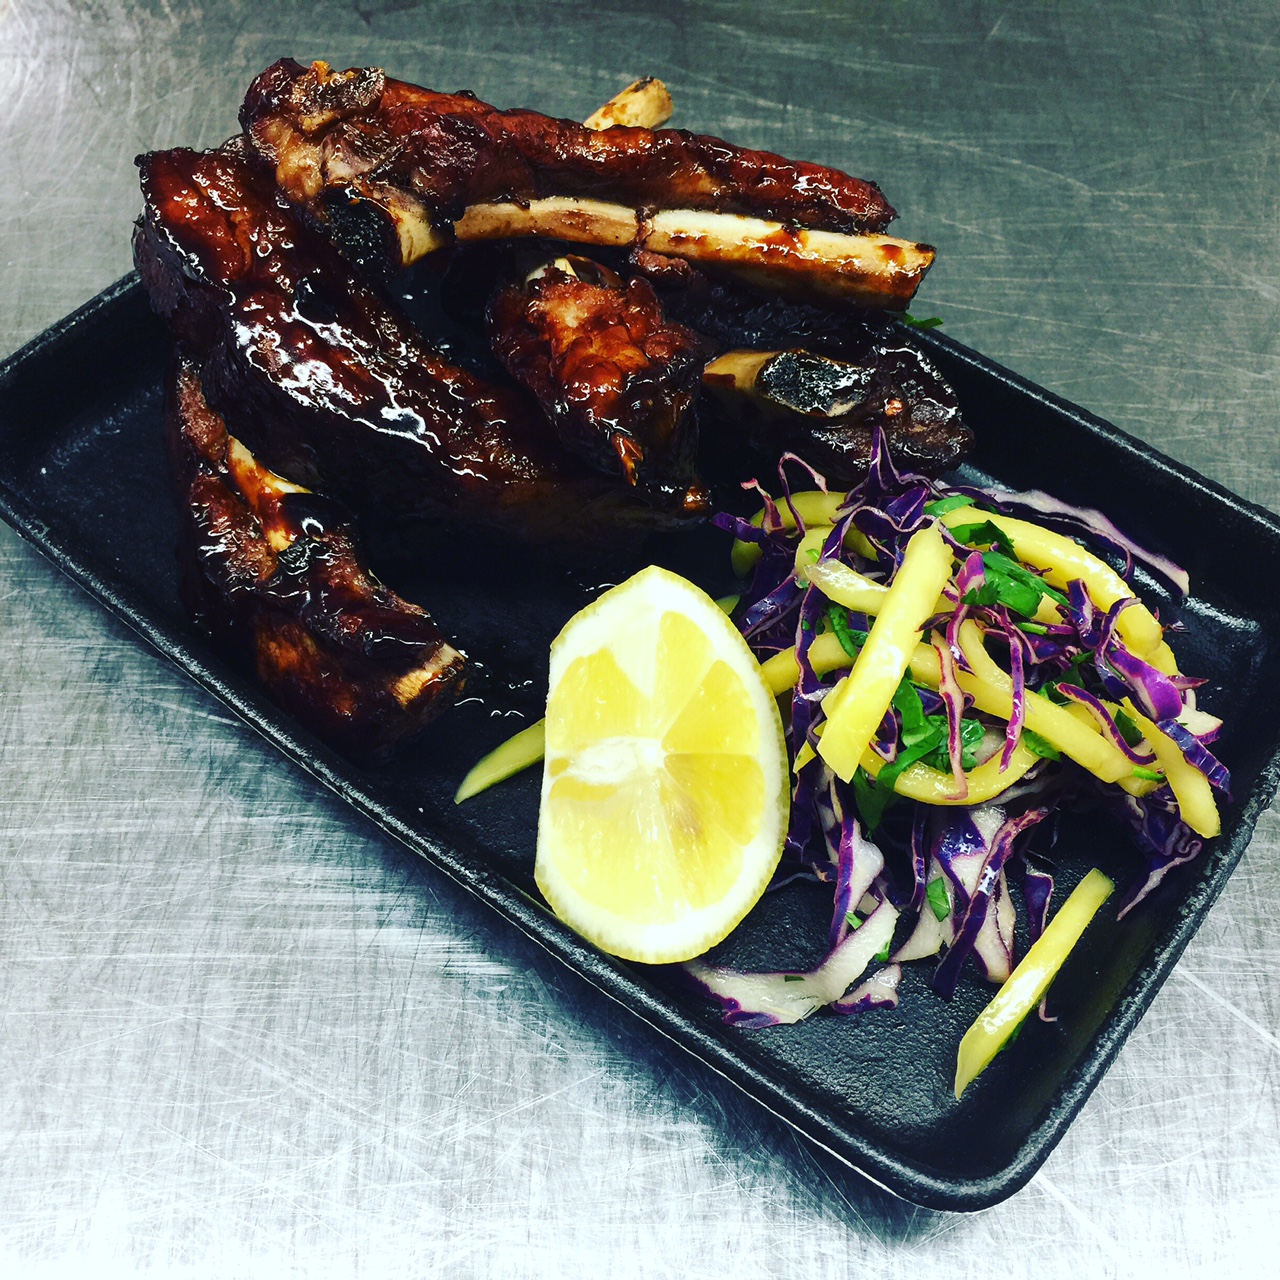 Chef Thomas Weibull's Baby Back Ribs, Glazed Adobo Style (credit: Foodie Chap/Liam Mayclem)